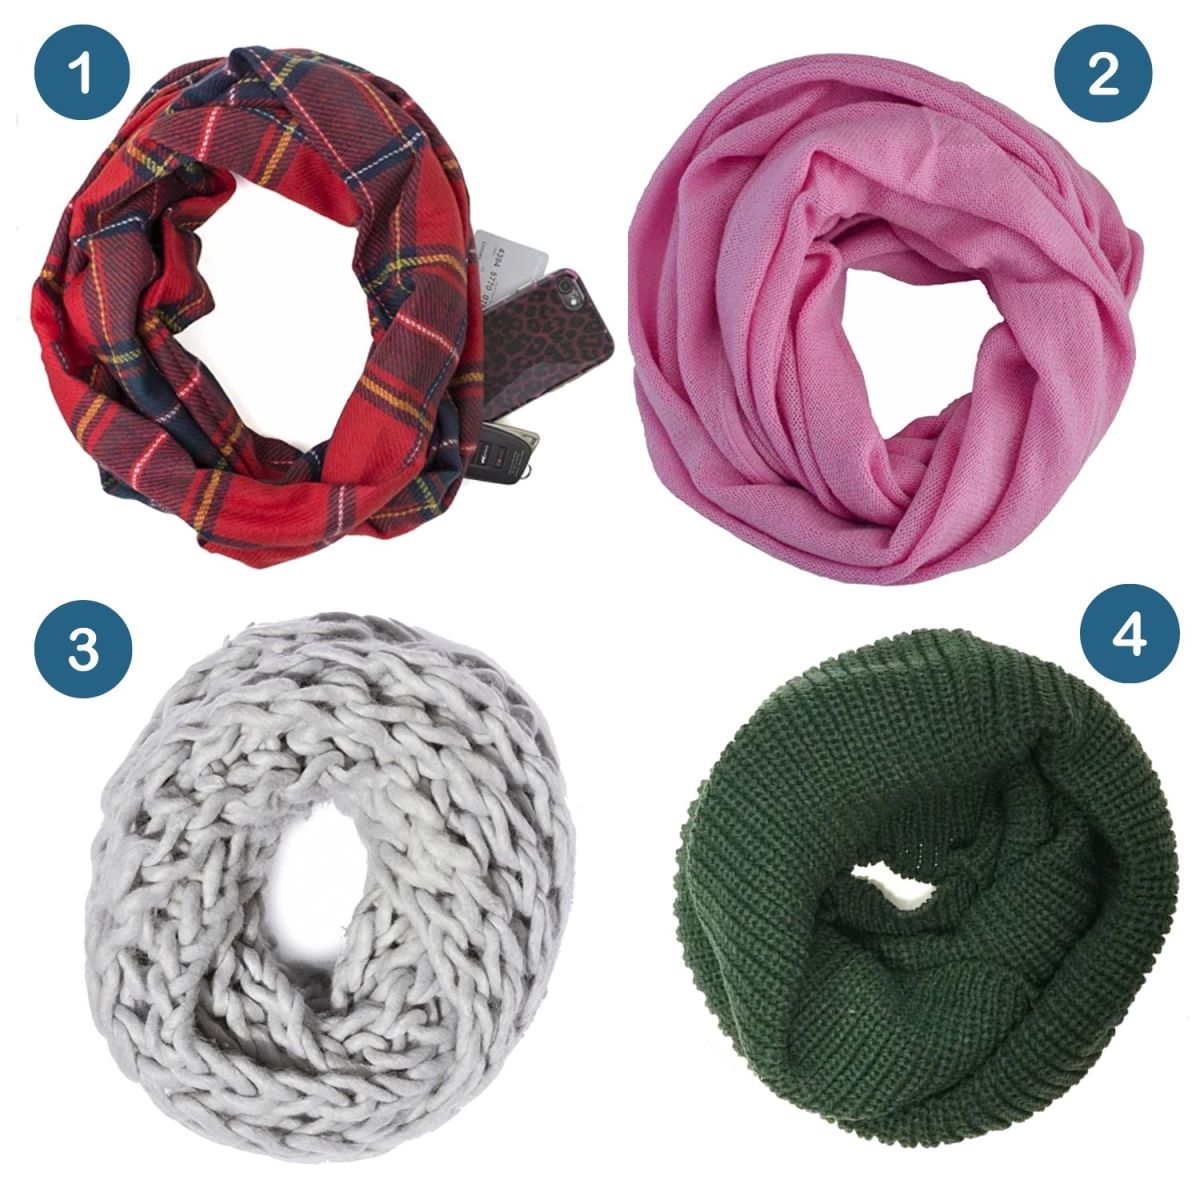 Why You Need an Infinity Scarf this Winter